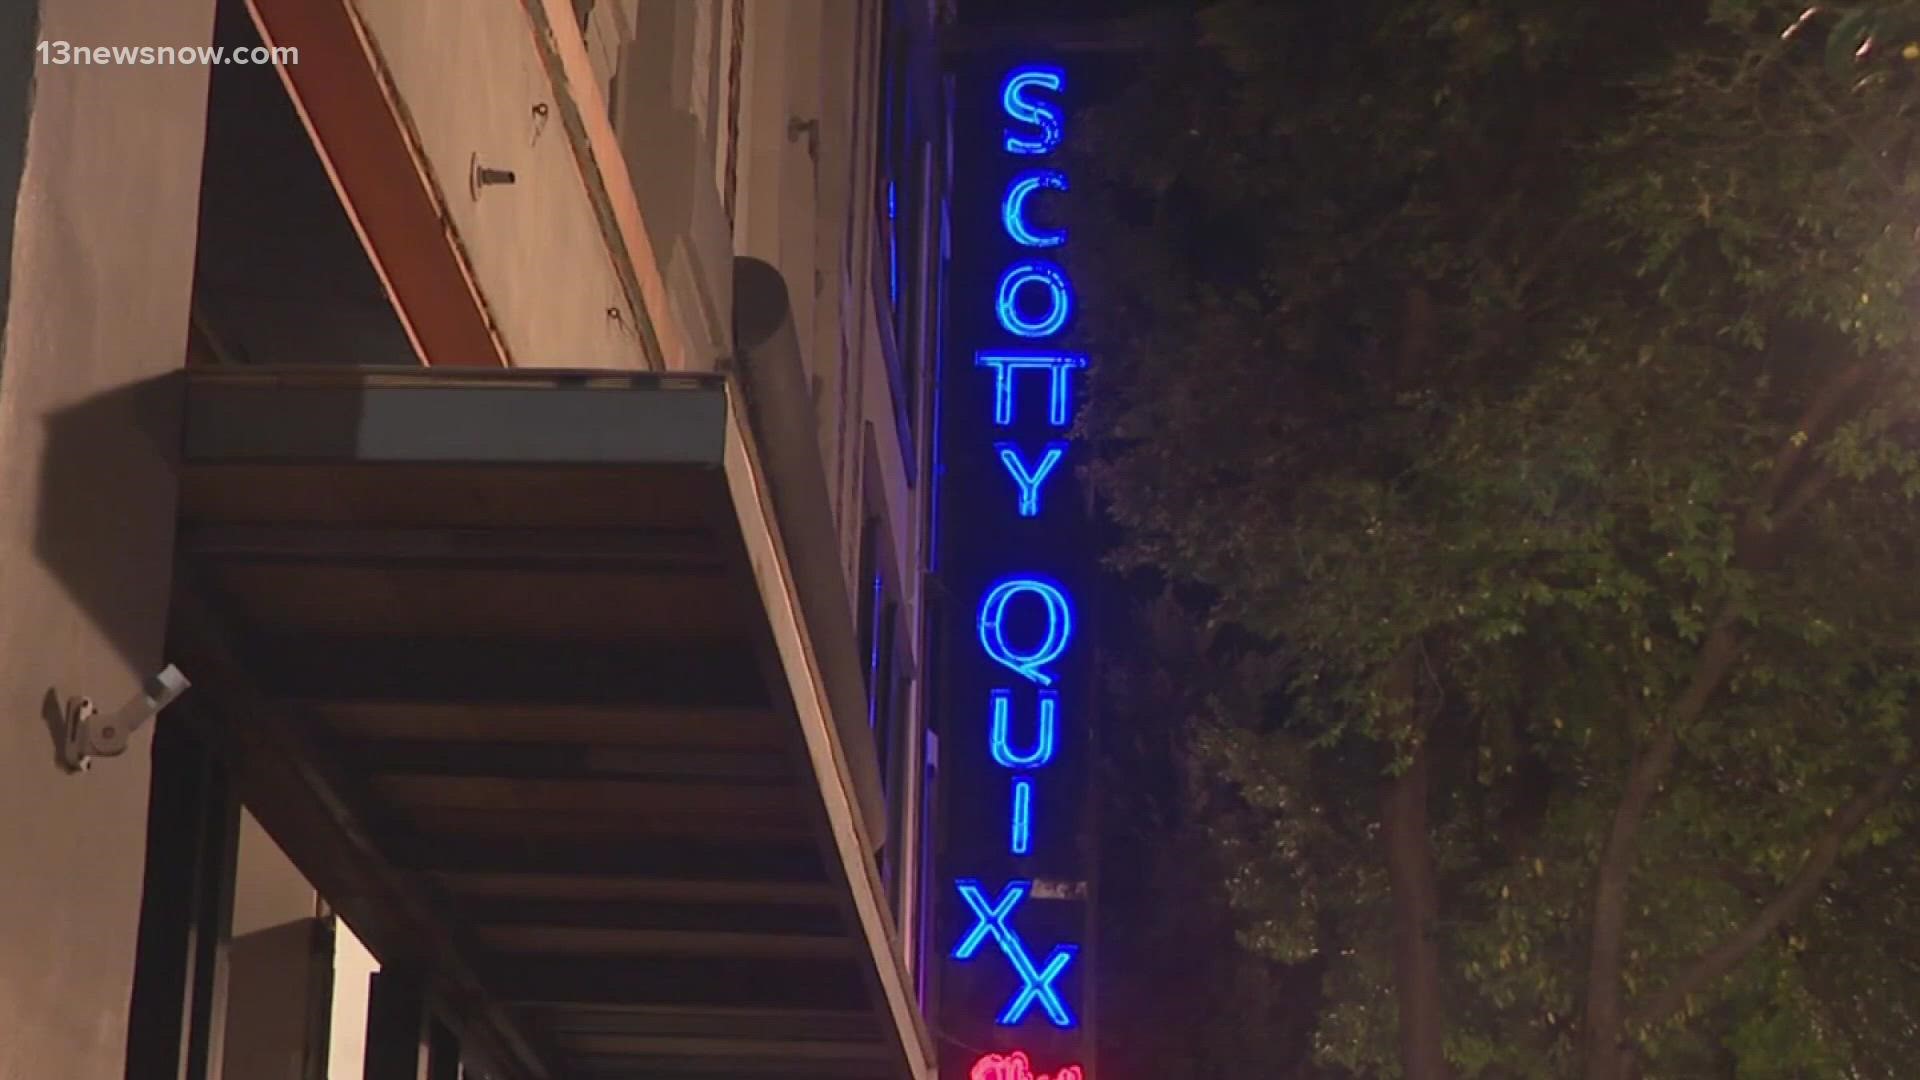 The shuttered nightclub owners are seeking $1 million each in damages.